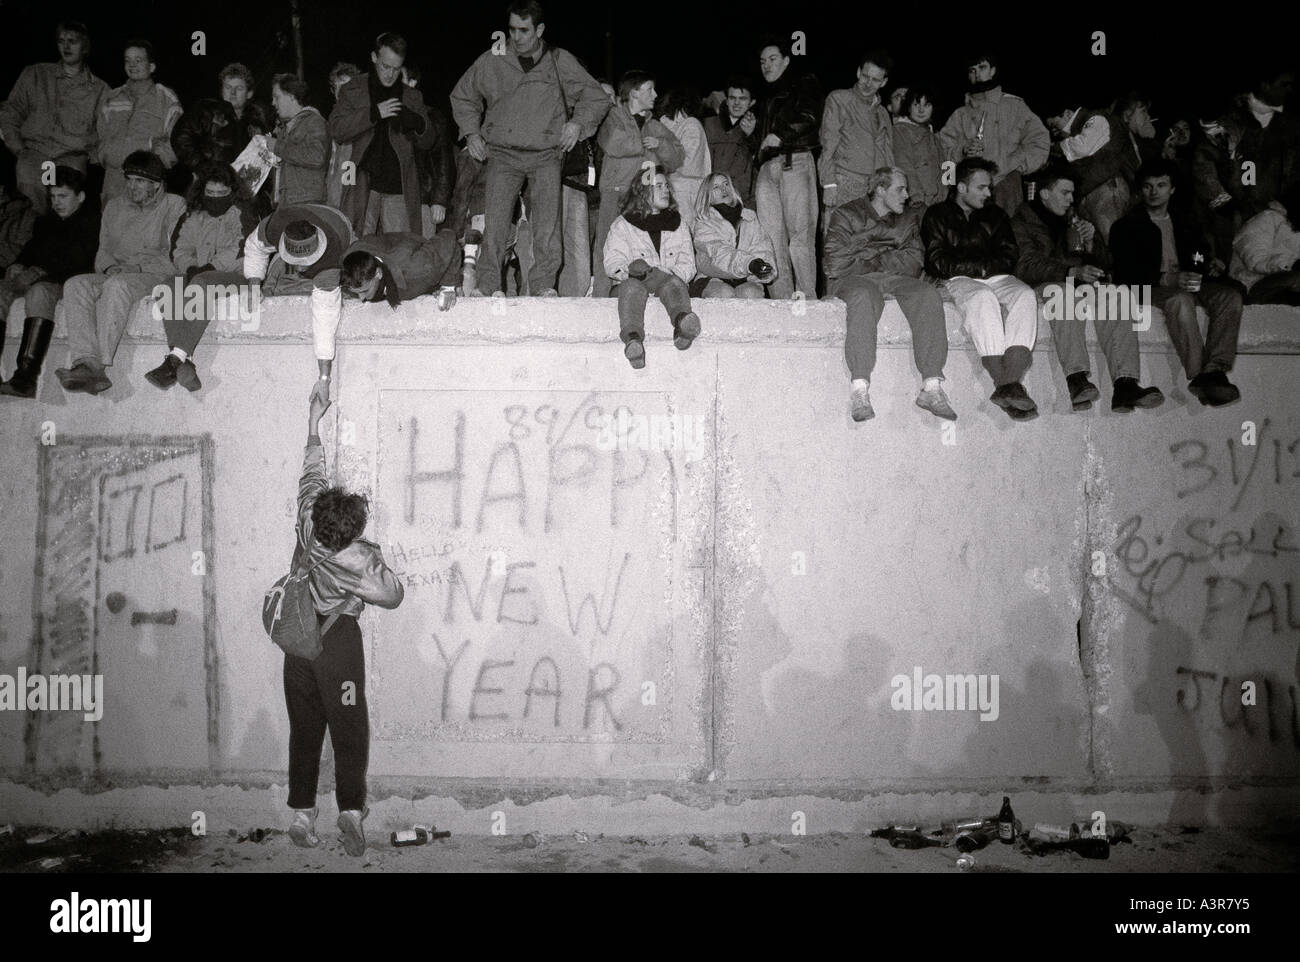 European History. New Year celebrations on the historical Berlin Wall in West Berlin in Germany in Europe during the Cold War. Stock Photo